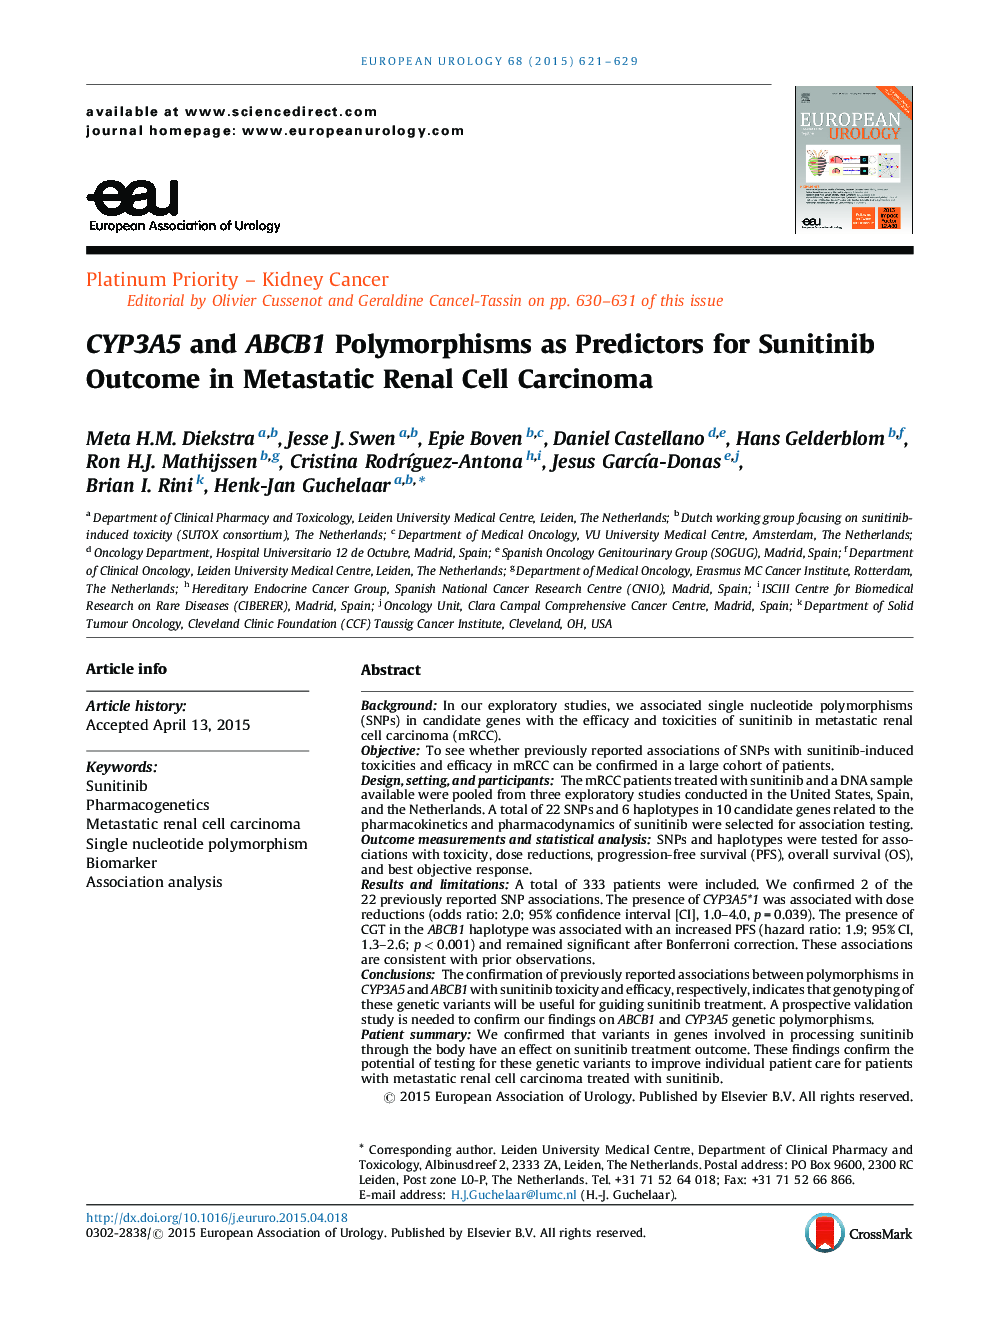 CYP3A5 and ABCB1 Polymorphisms as Predictors for Sunitinib Outcome in Metastatic Renal Cell Carcinoma